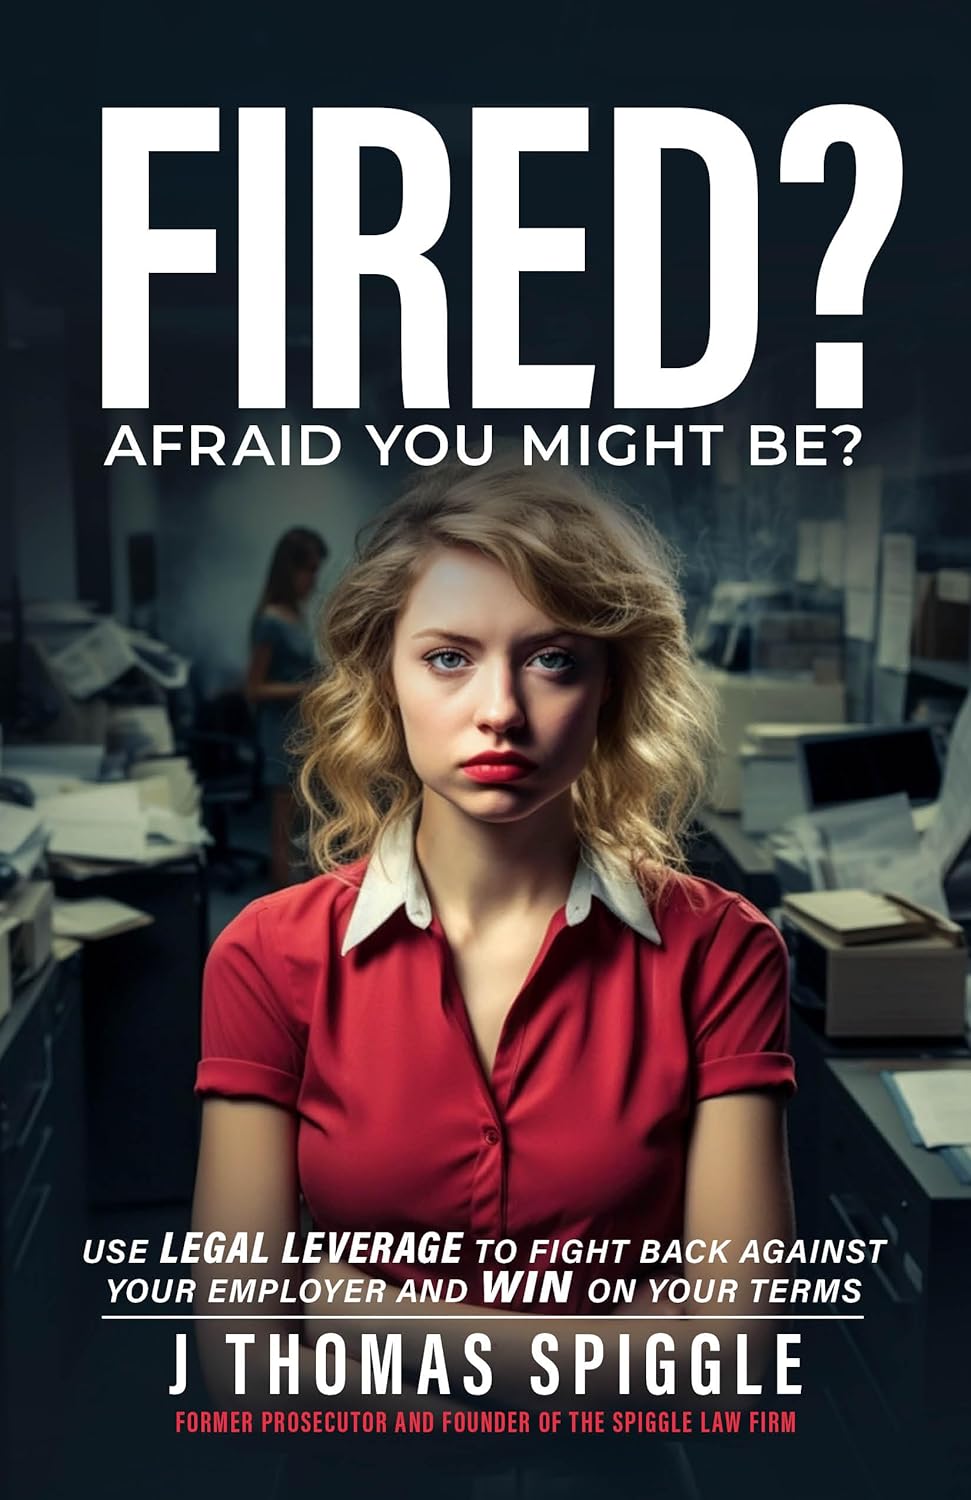 Fired? Afraid You Might Be?